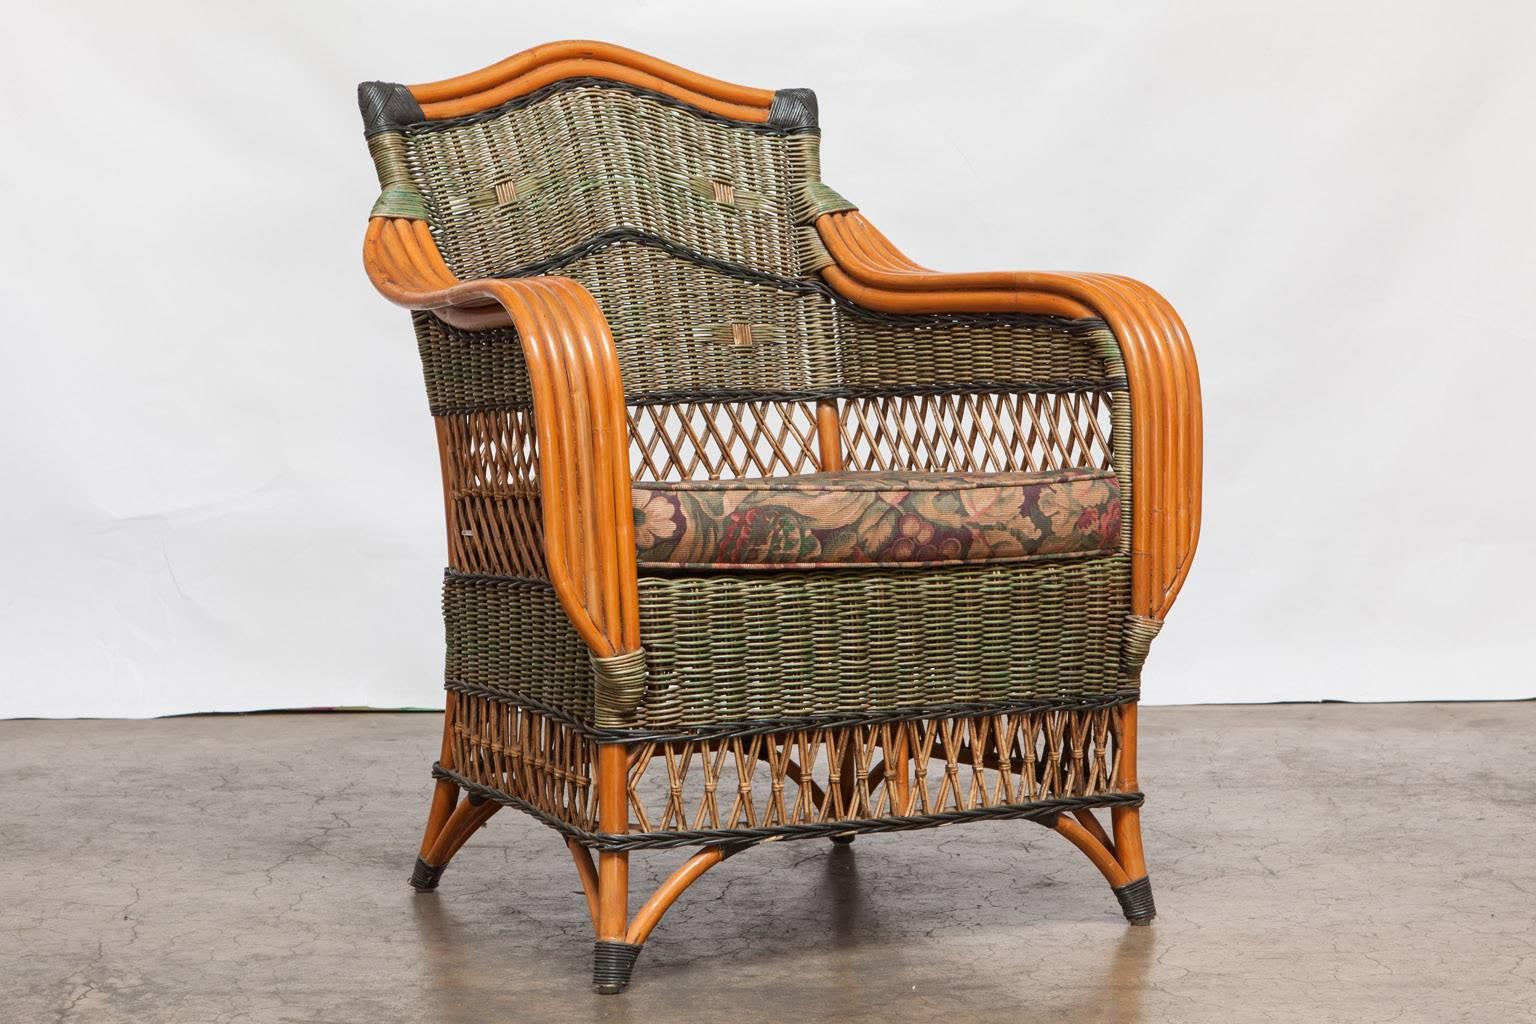 Artistic pair of French rattan armchairs made by famous maker Grange in the Art Deco style. Featuring wide five strand rattan arms accented by green wicker covered frames. The backs have a camel back hump and the seats have a removable upholstered